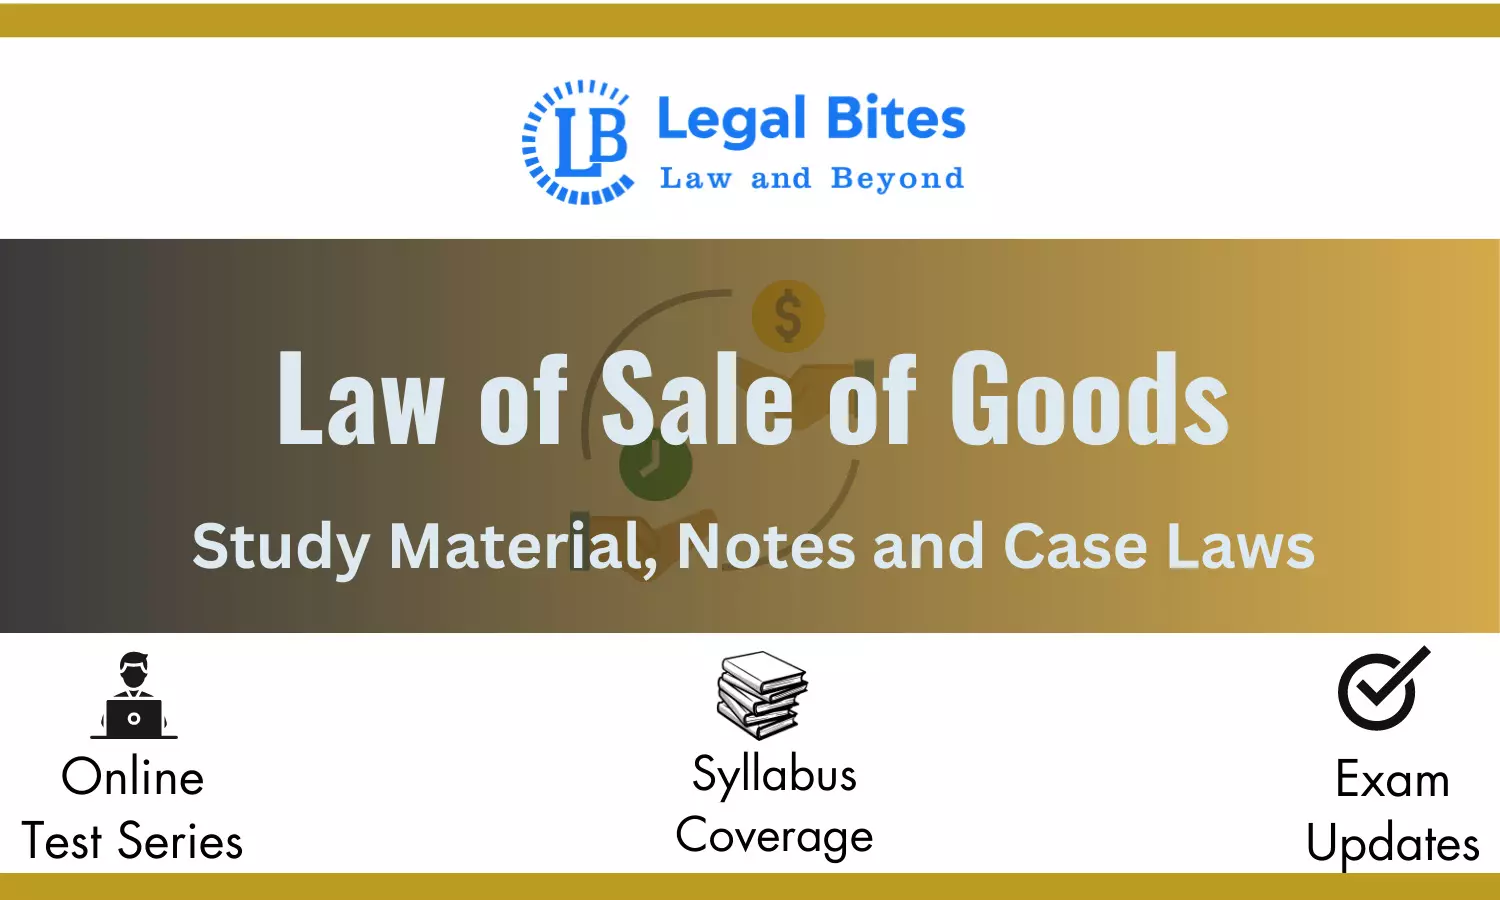 Law of Sale of Goods - Notes, Case Laws And Study Material